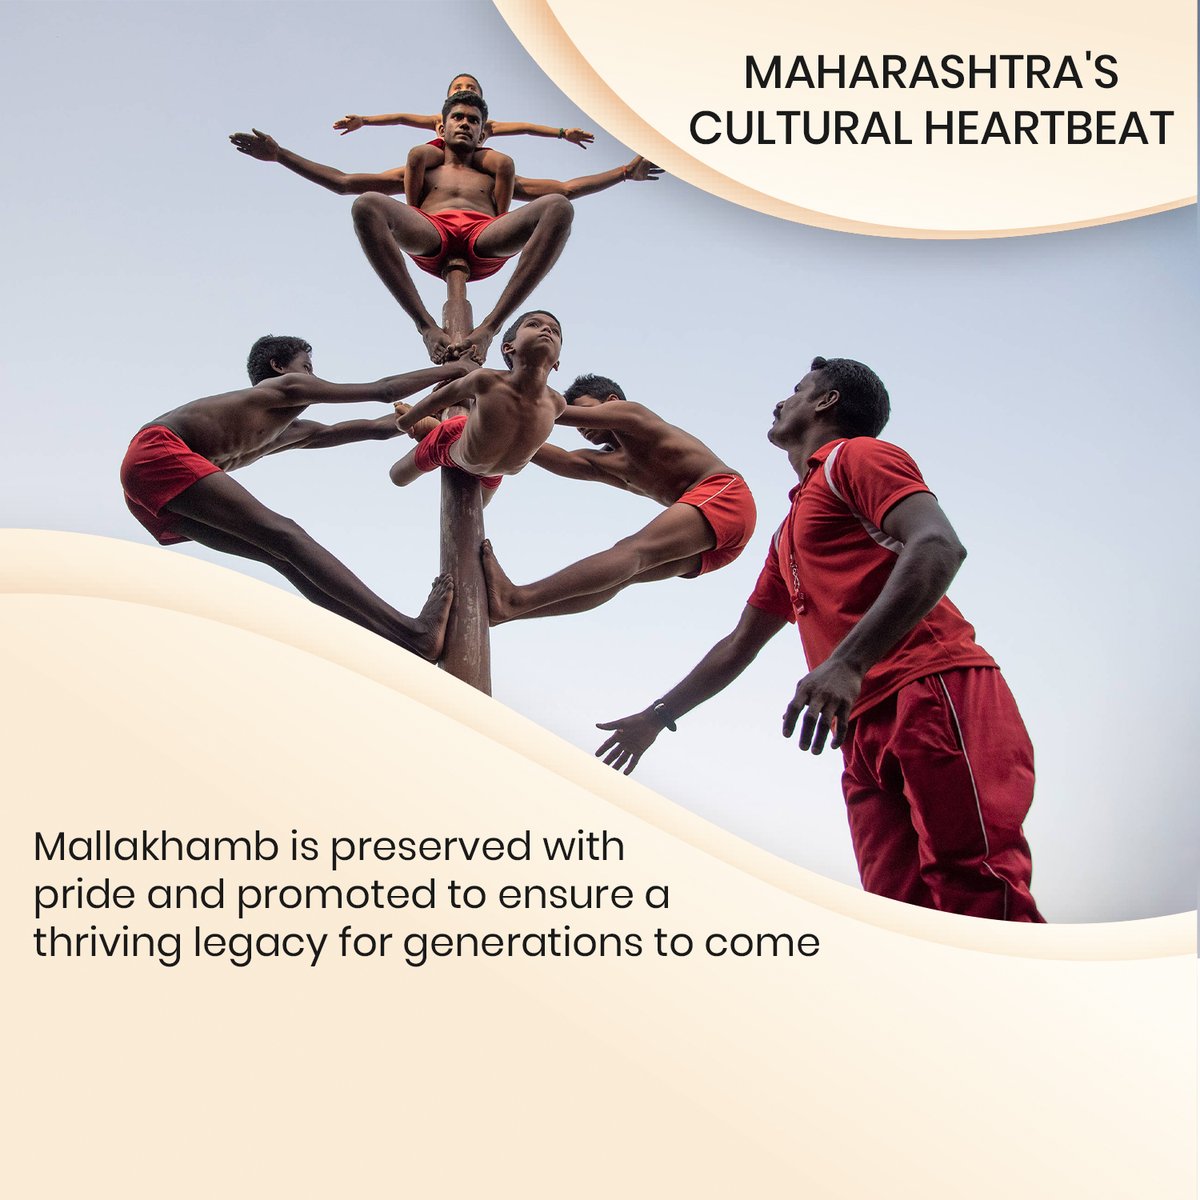 The Ancient Sports Alive Today. Experience its rich history and continued celebration in the Indian subcontinent. 
#Mallakhamb #AncientSports #IndianSports #TraditionalSports #Pune #Maharashtra #MaharashtraJayate #explore